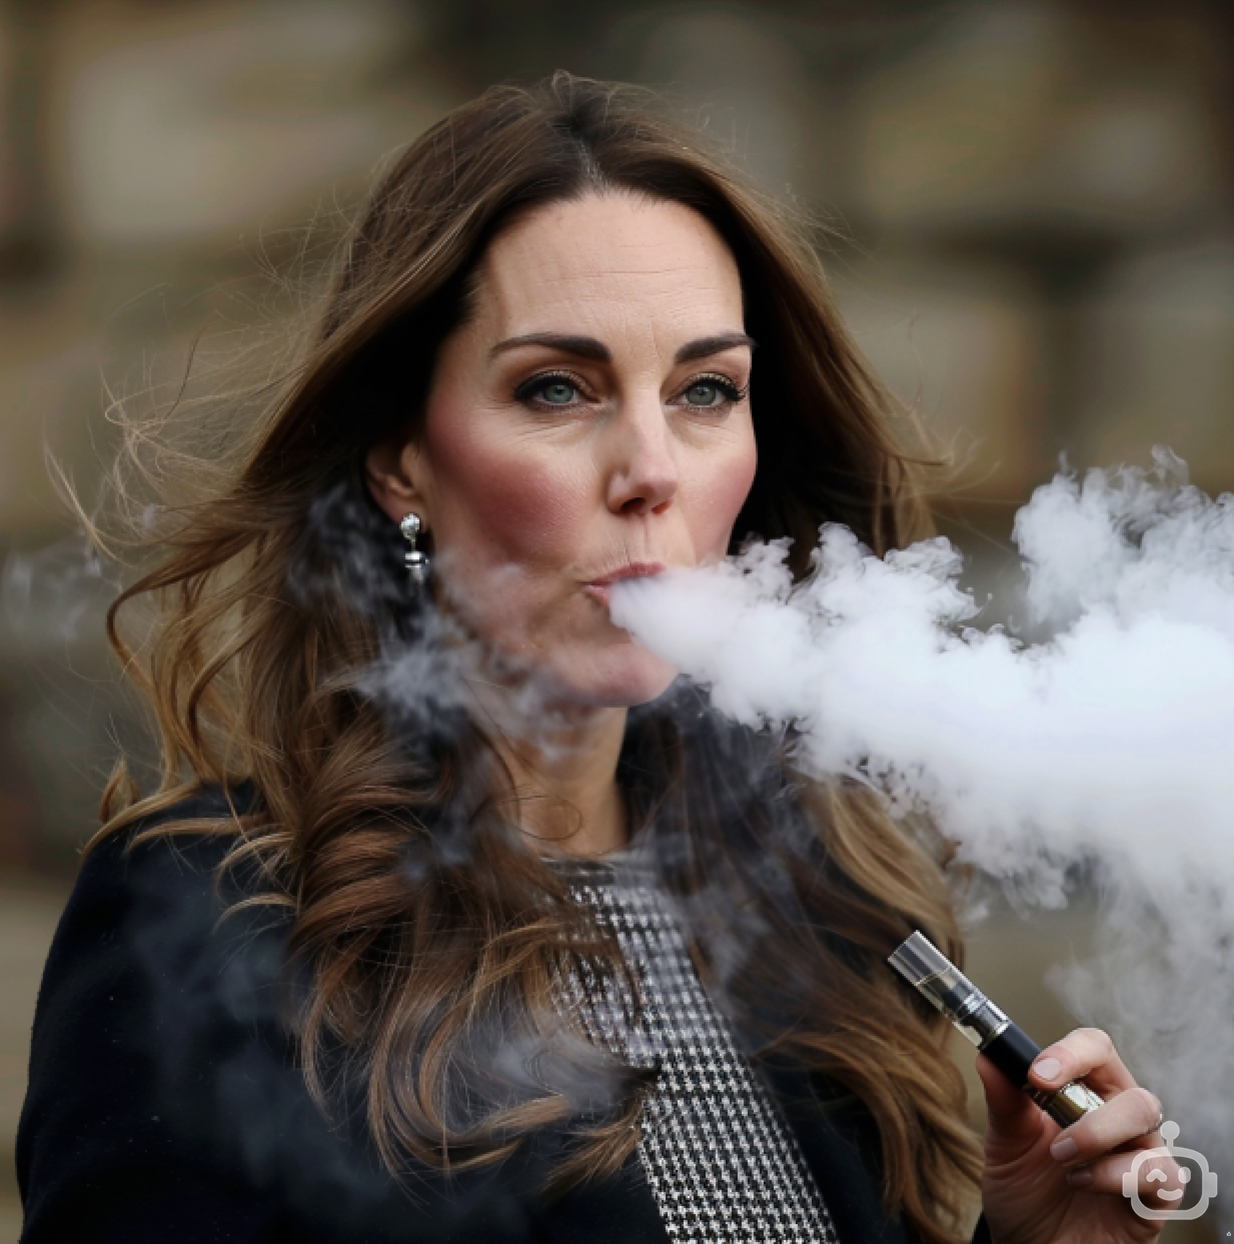 Woman exhales vapor from an e-cigarette, wearing checked dress, feather earrings